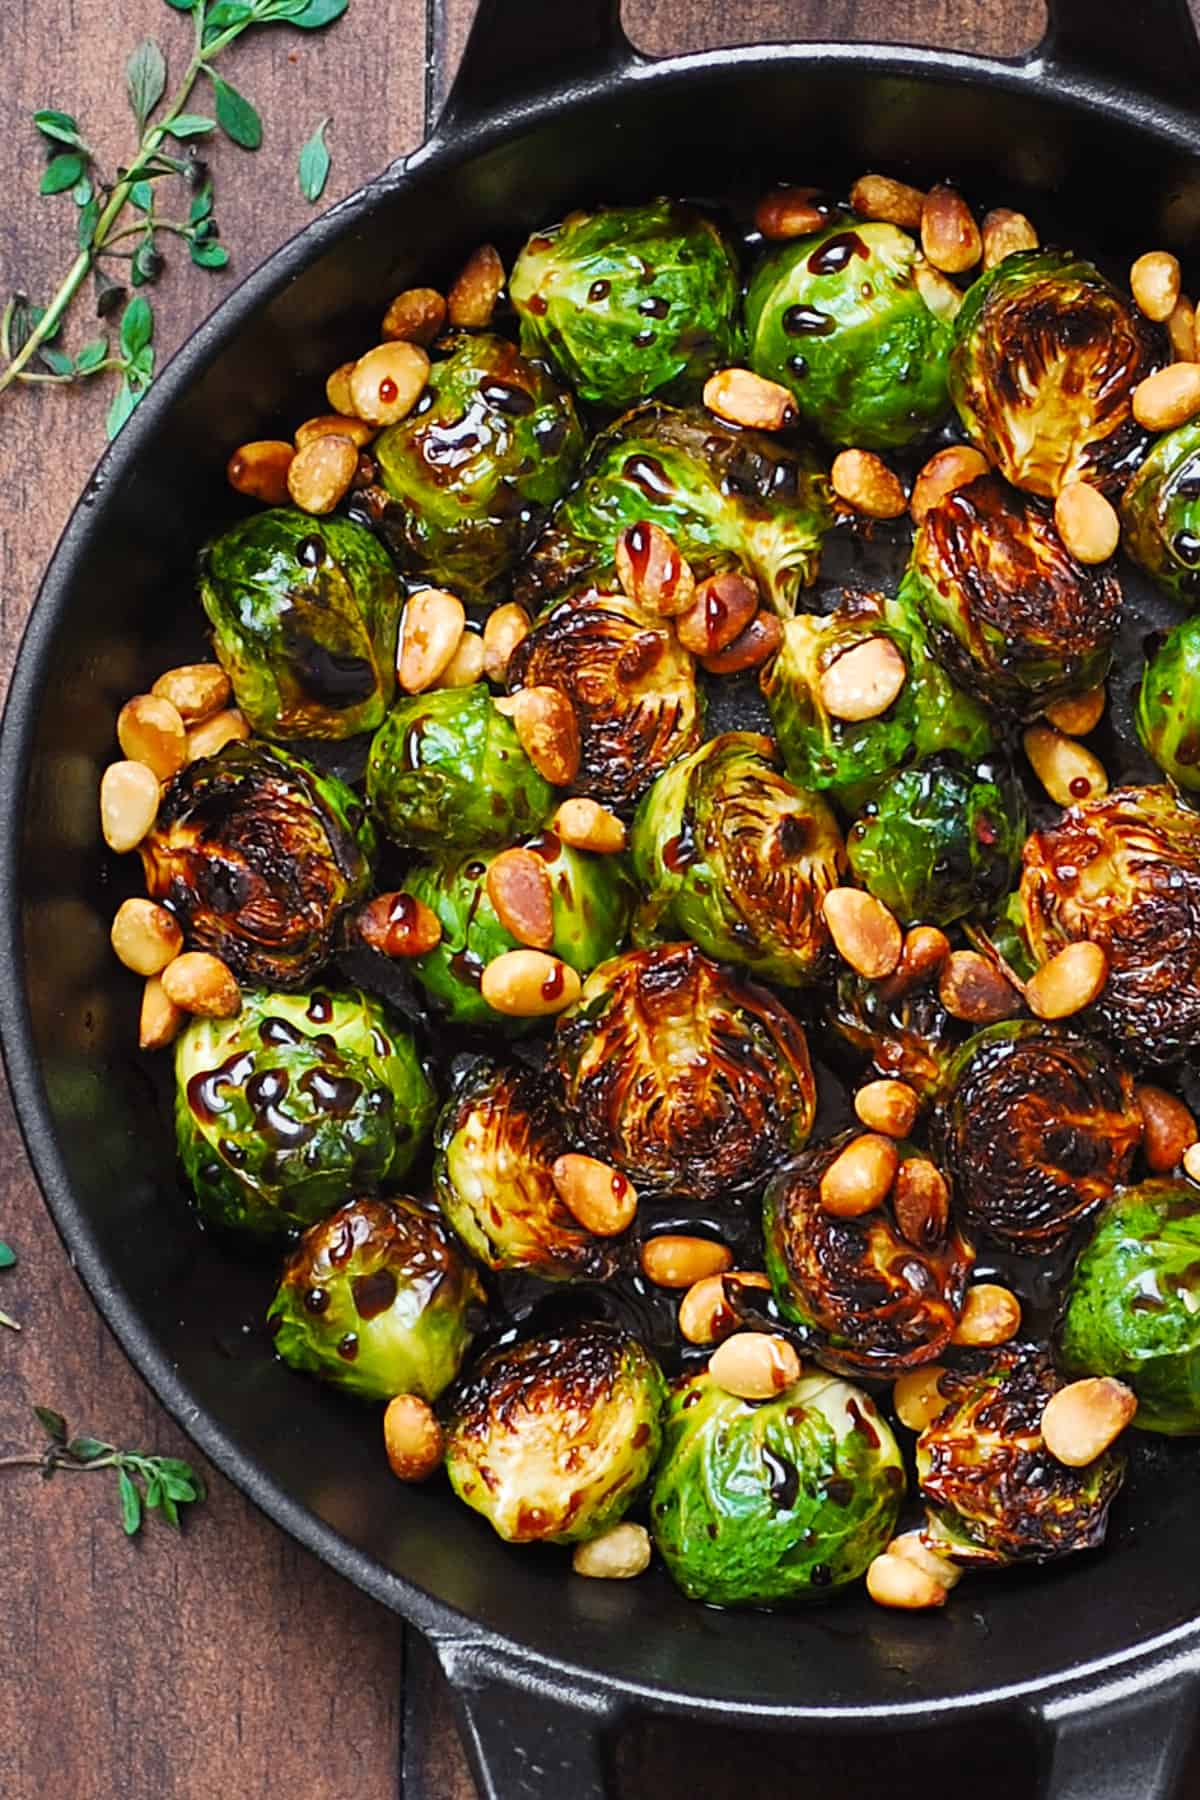 Balsamic Brussels sprouts with pine nuts in a cast-iron pan